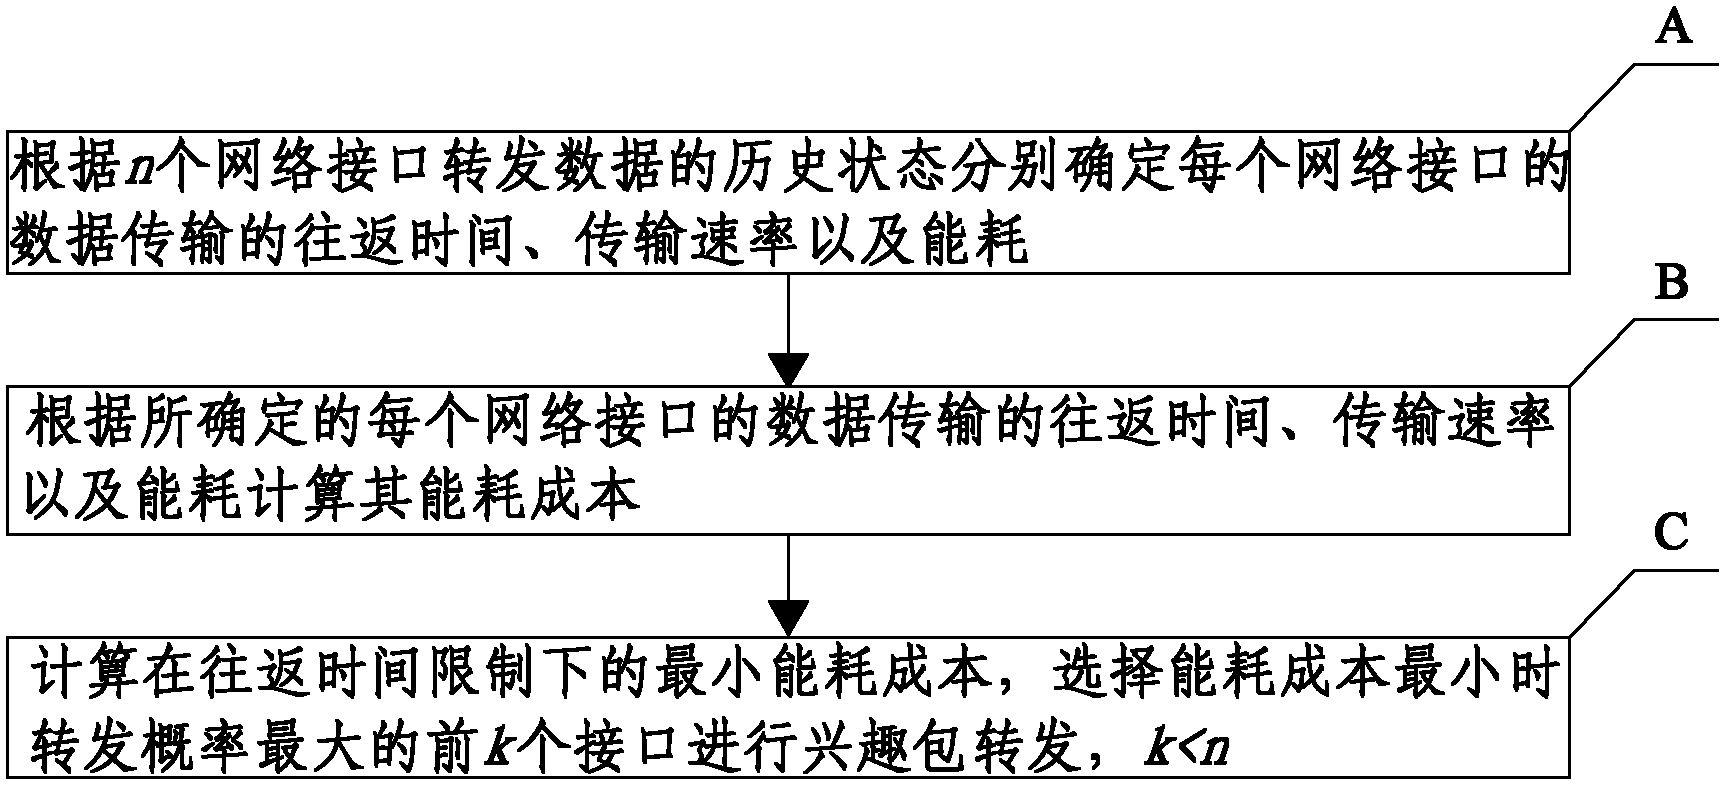 Routing method of content-centric network strategy layer